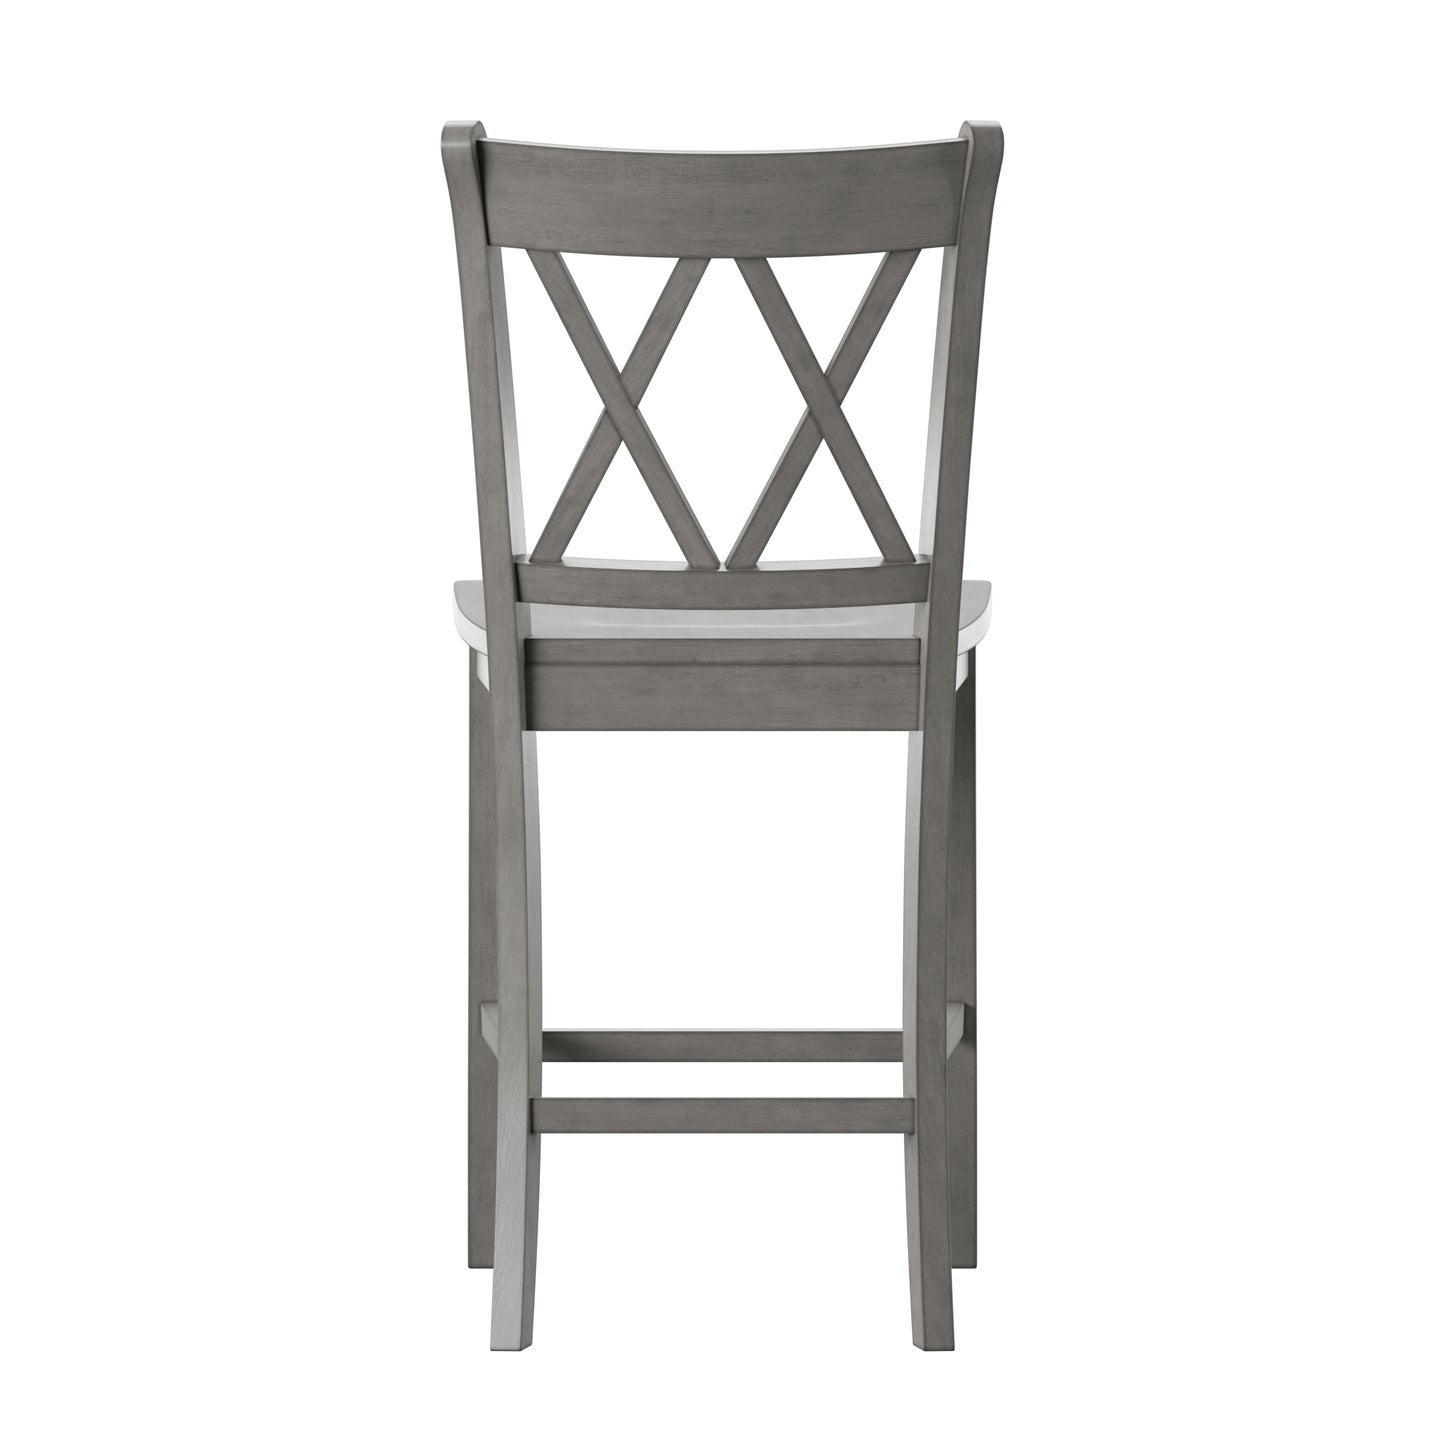 Double X-Back Counter Height Chairs (Set of 2) - Antique Grey Finish